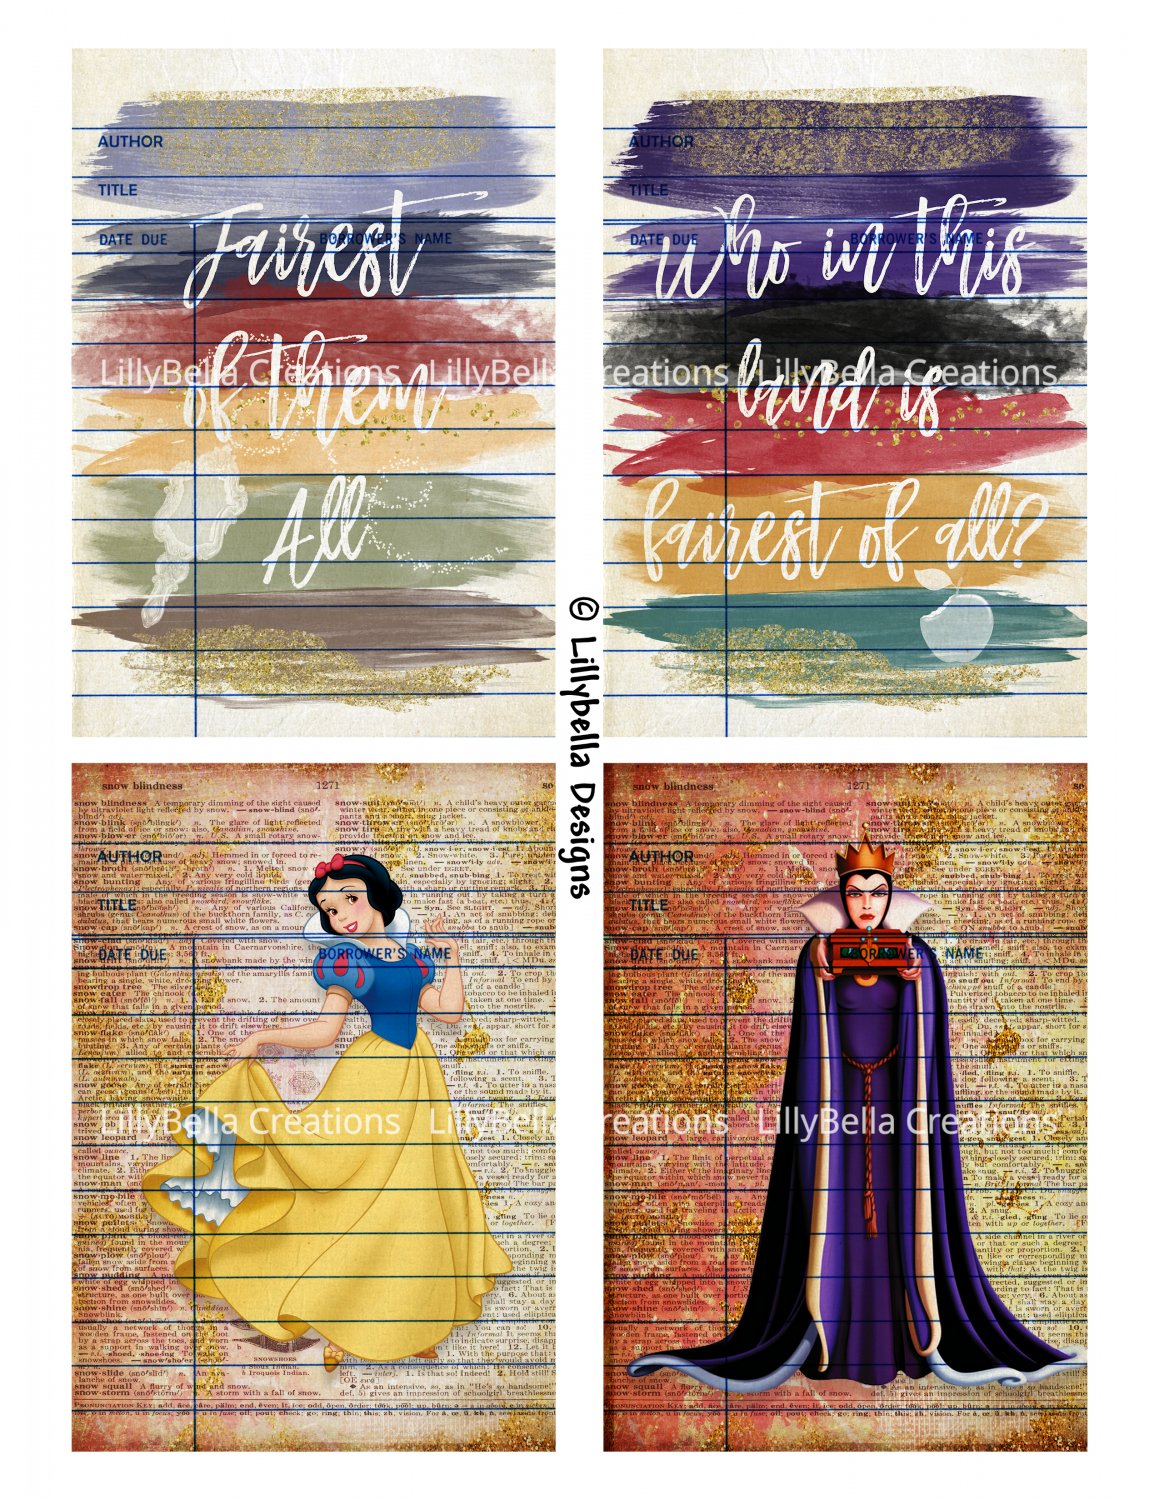 Snow White & Evil Queen Library Cards - 3.5 x 5 inch Note Card - 12 total Mixed Media & Watercolor